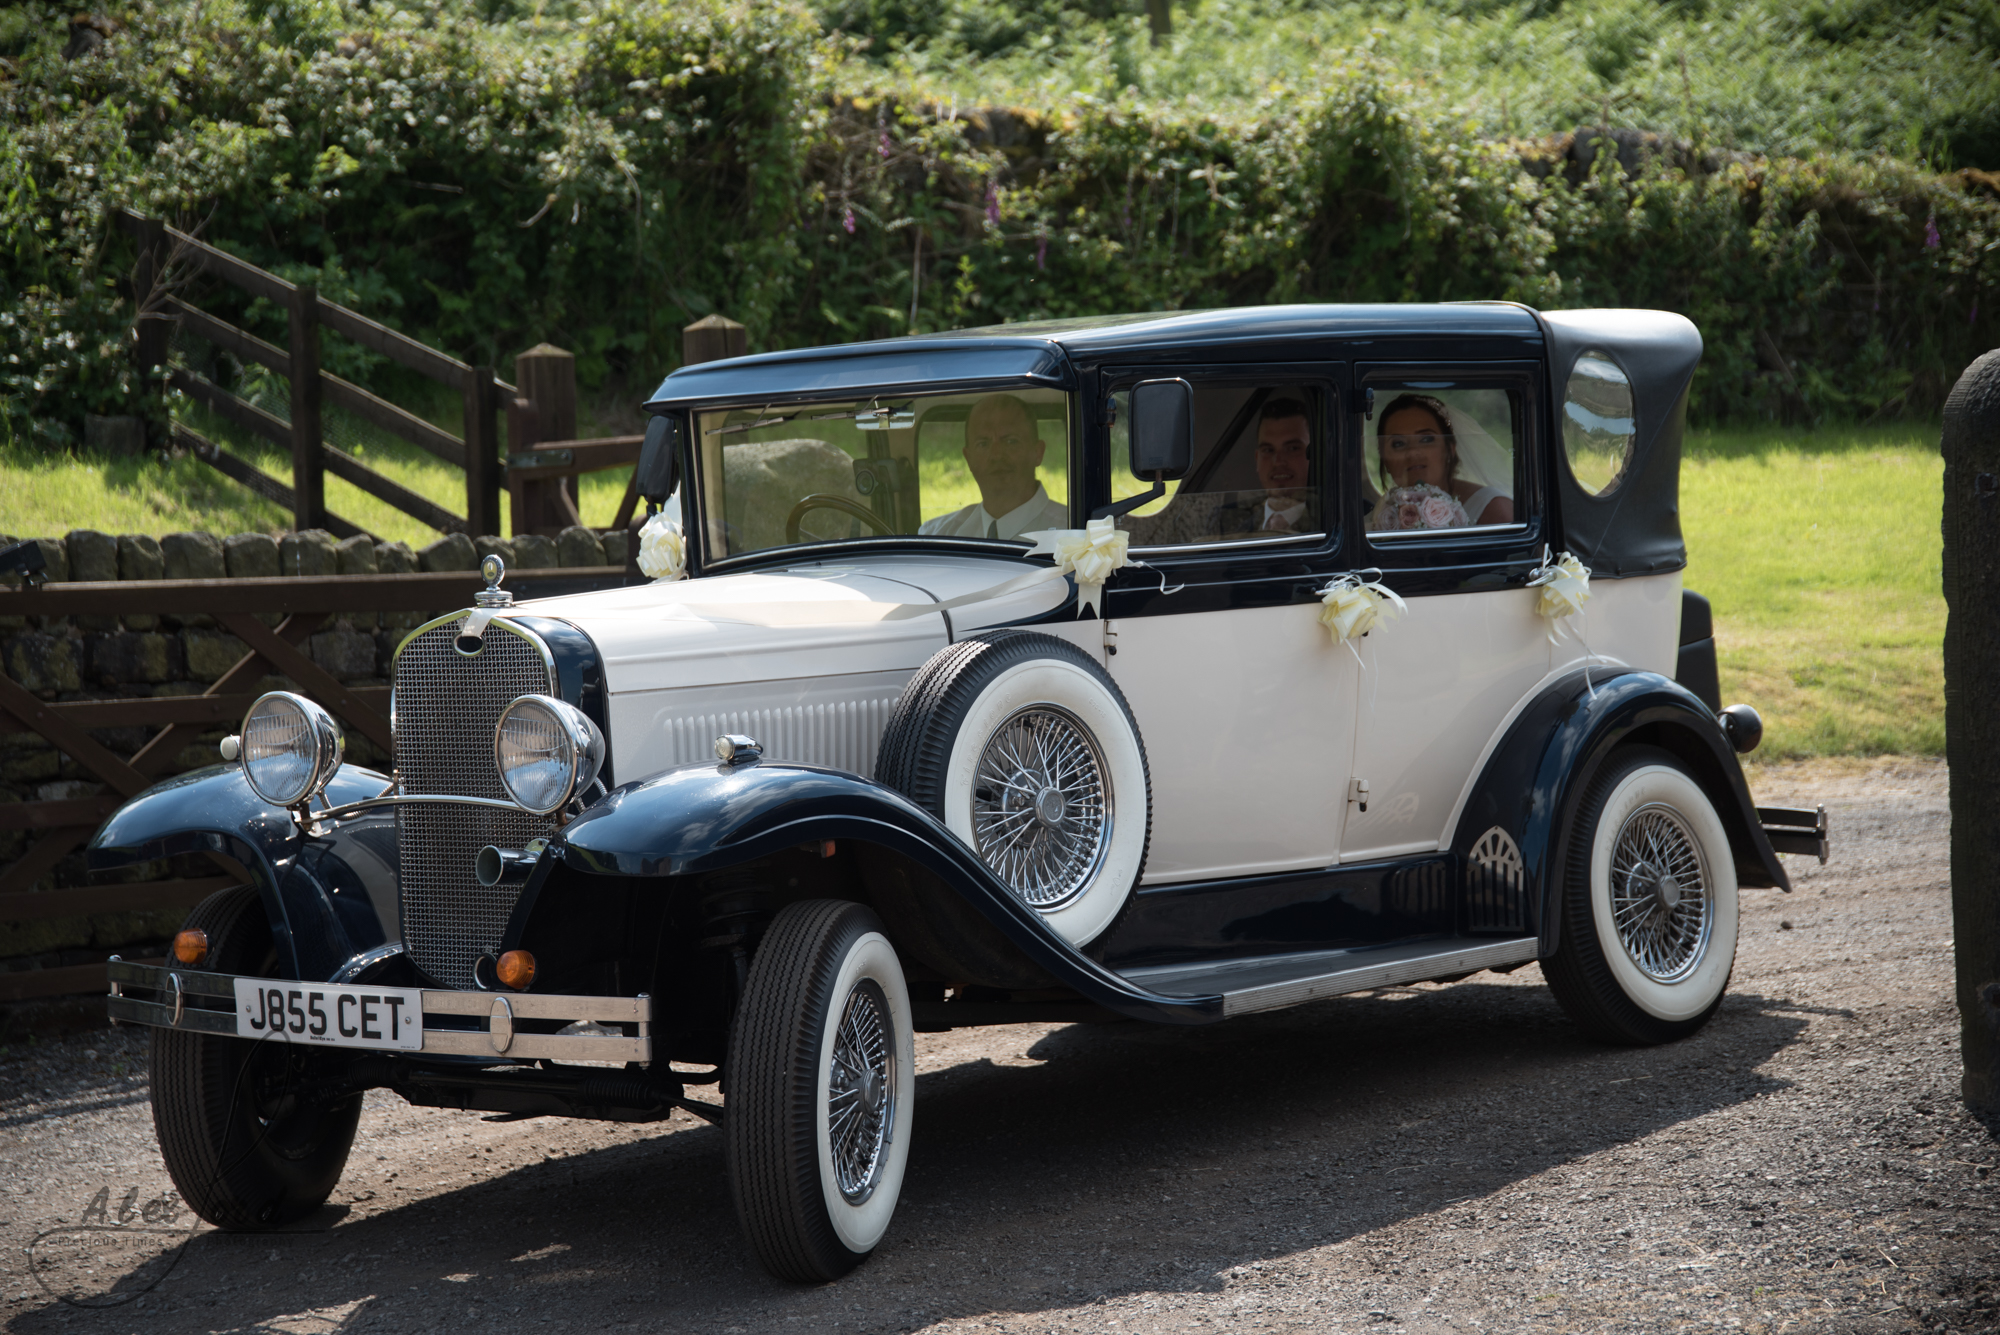 The car arrives at Swancar farm with the bride and groom